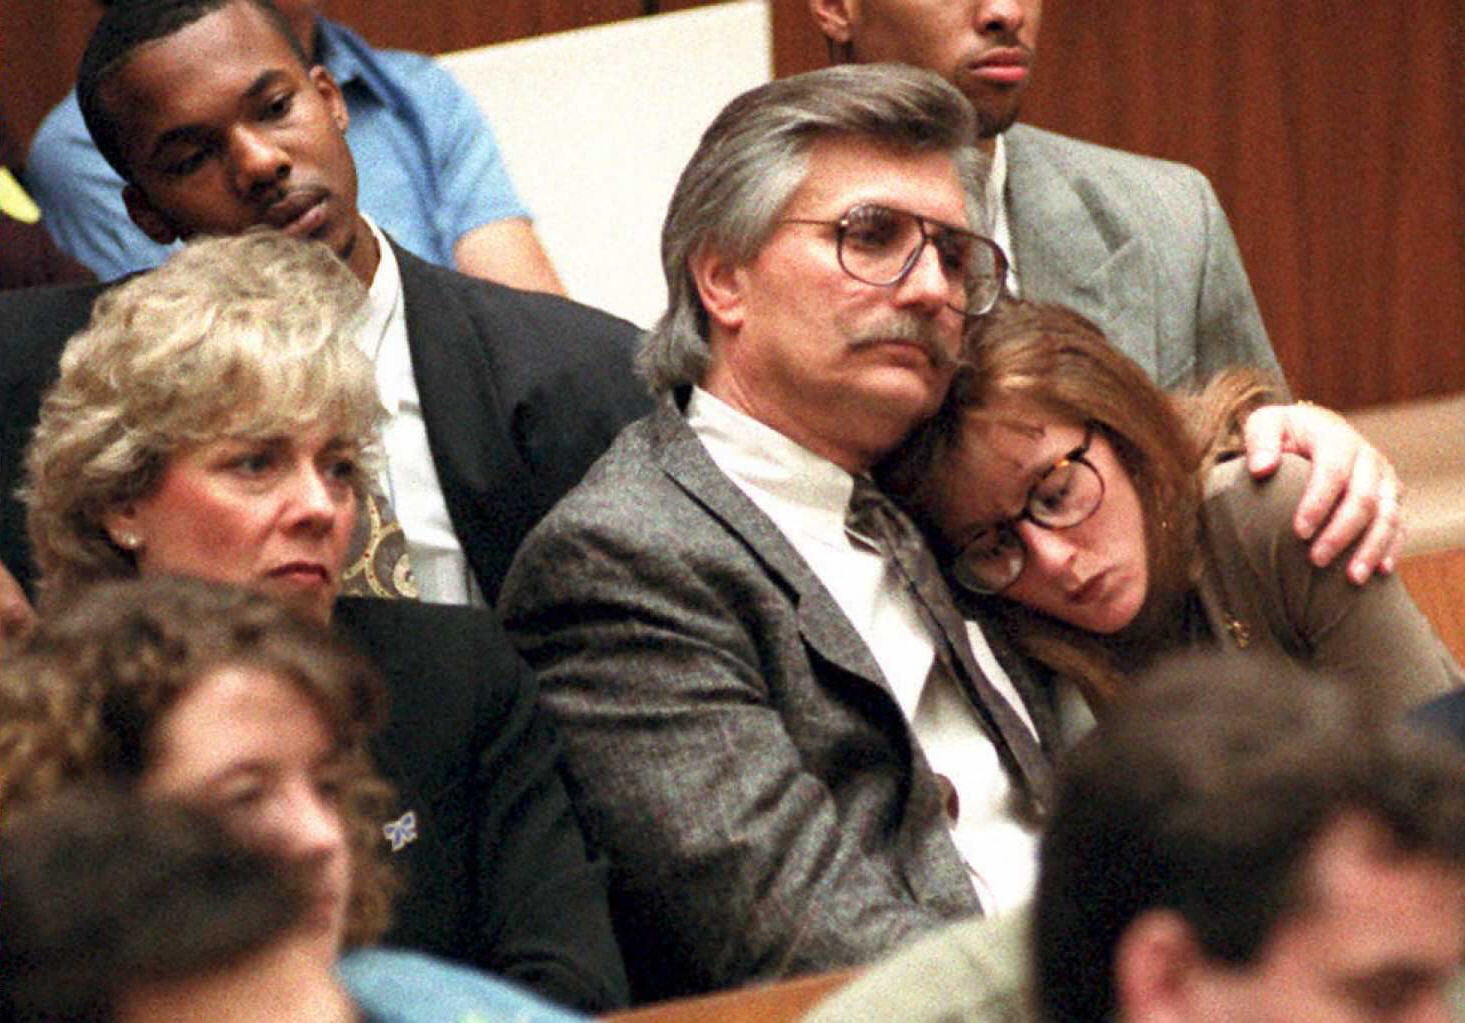 The family of Ronald Goldman during a session of the murder trial on 8 March 1995